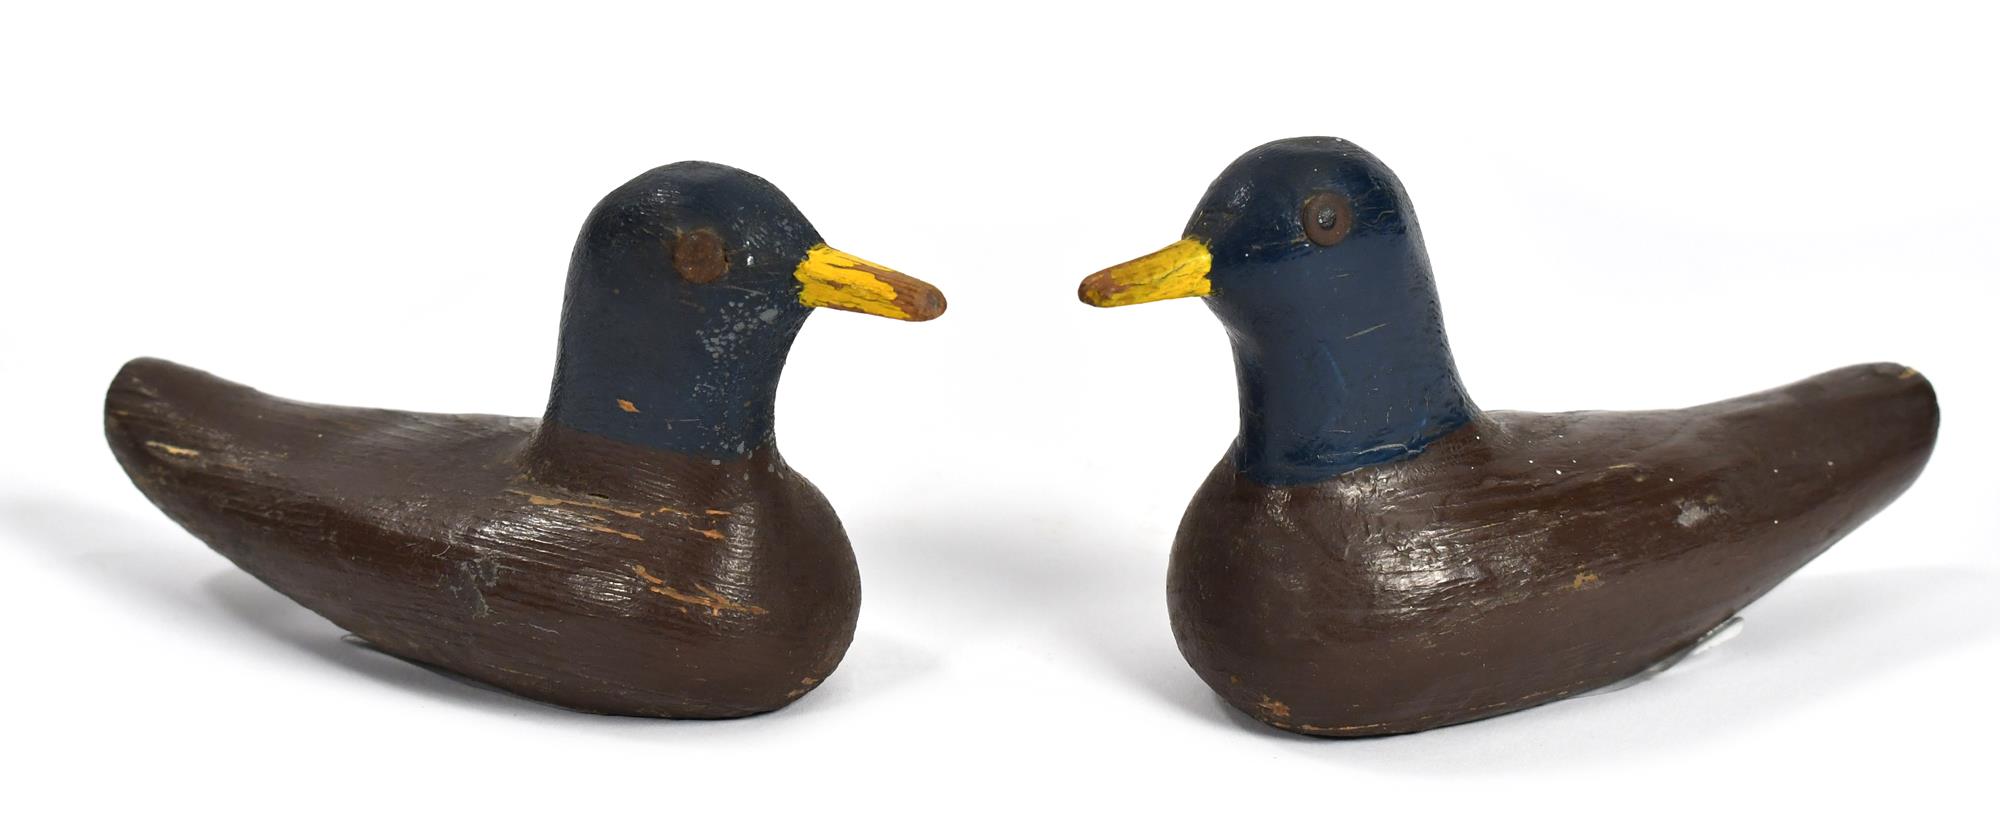 PAIR OF MINIATURE DUCK DECOYS. Two small